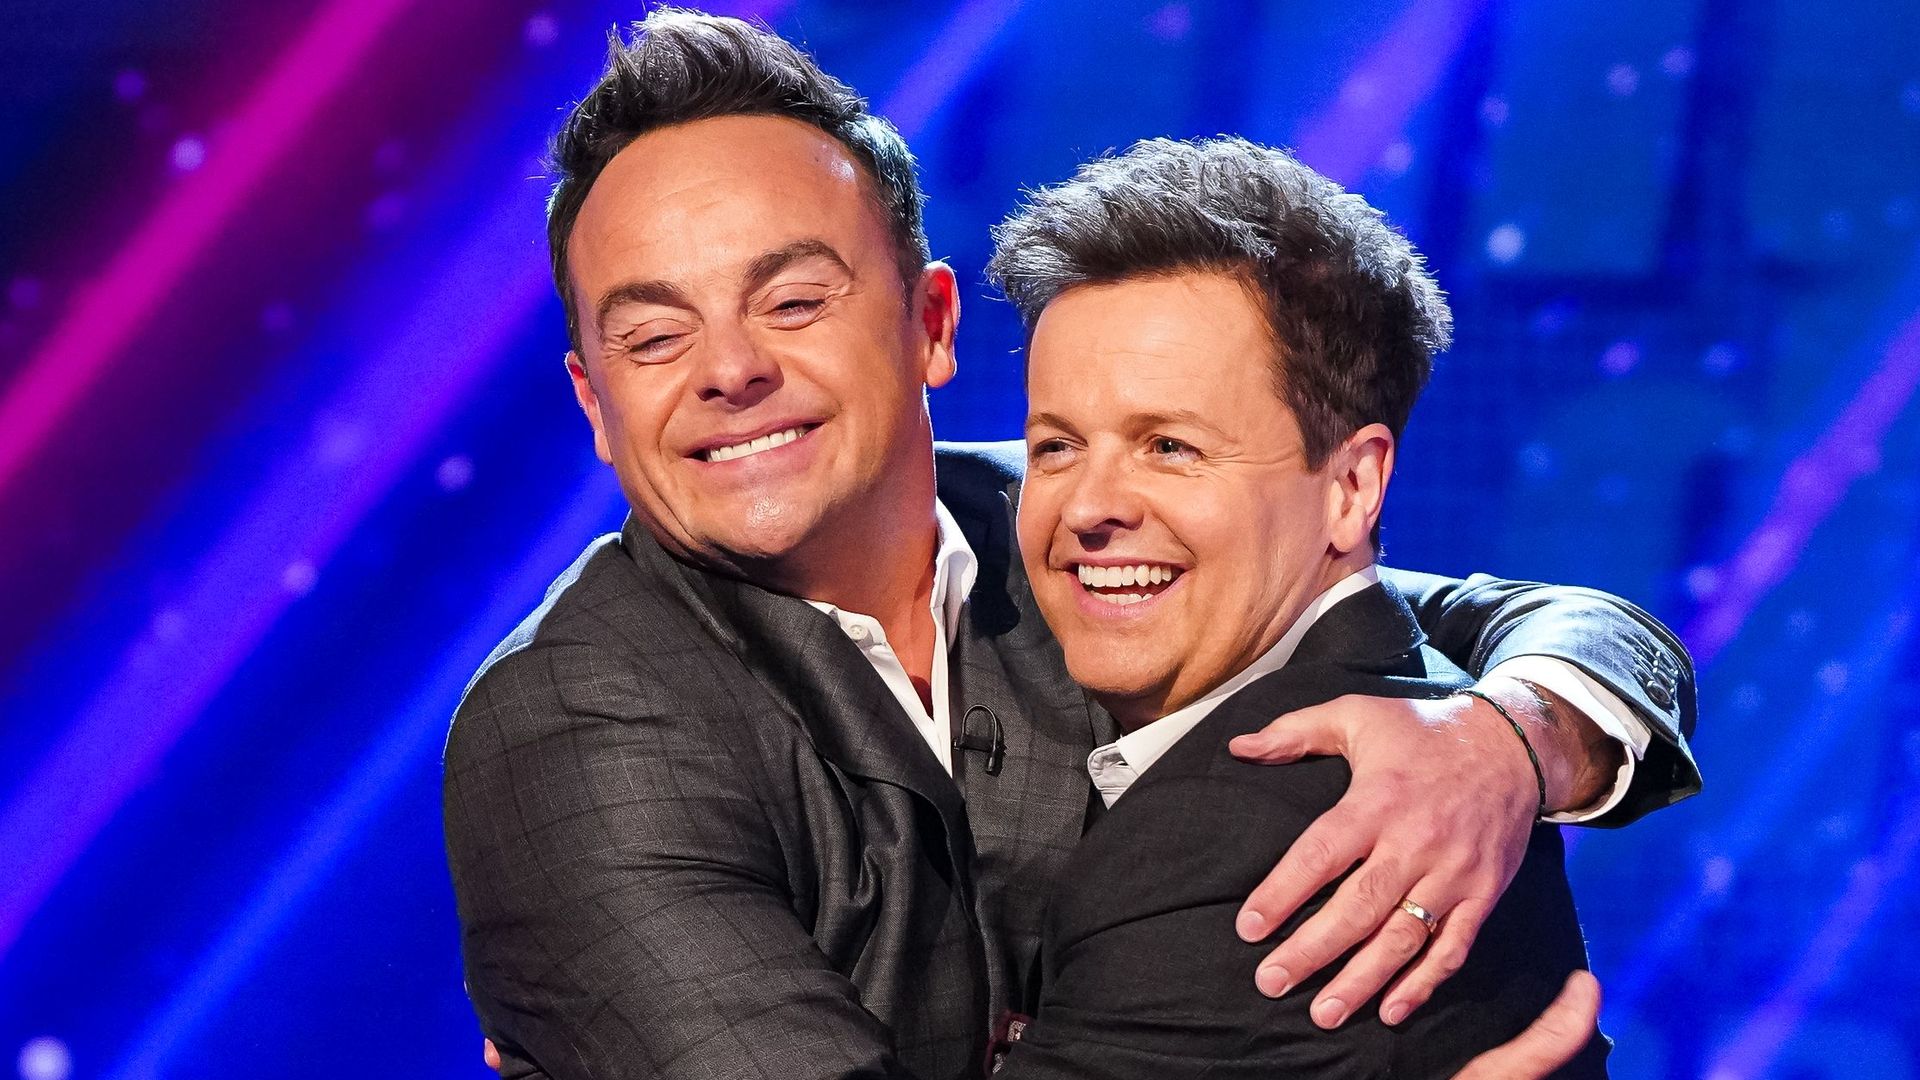 Ant and Dec's emotional TV farewell leaves fans crying - 'Literal tears'